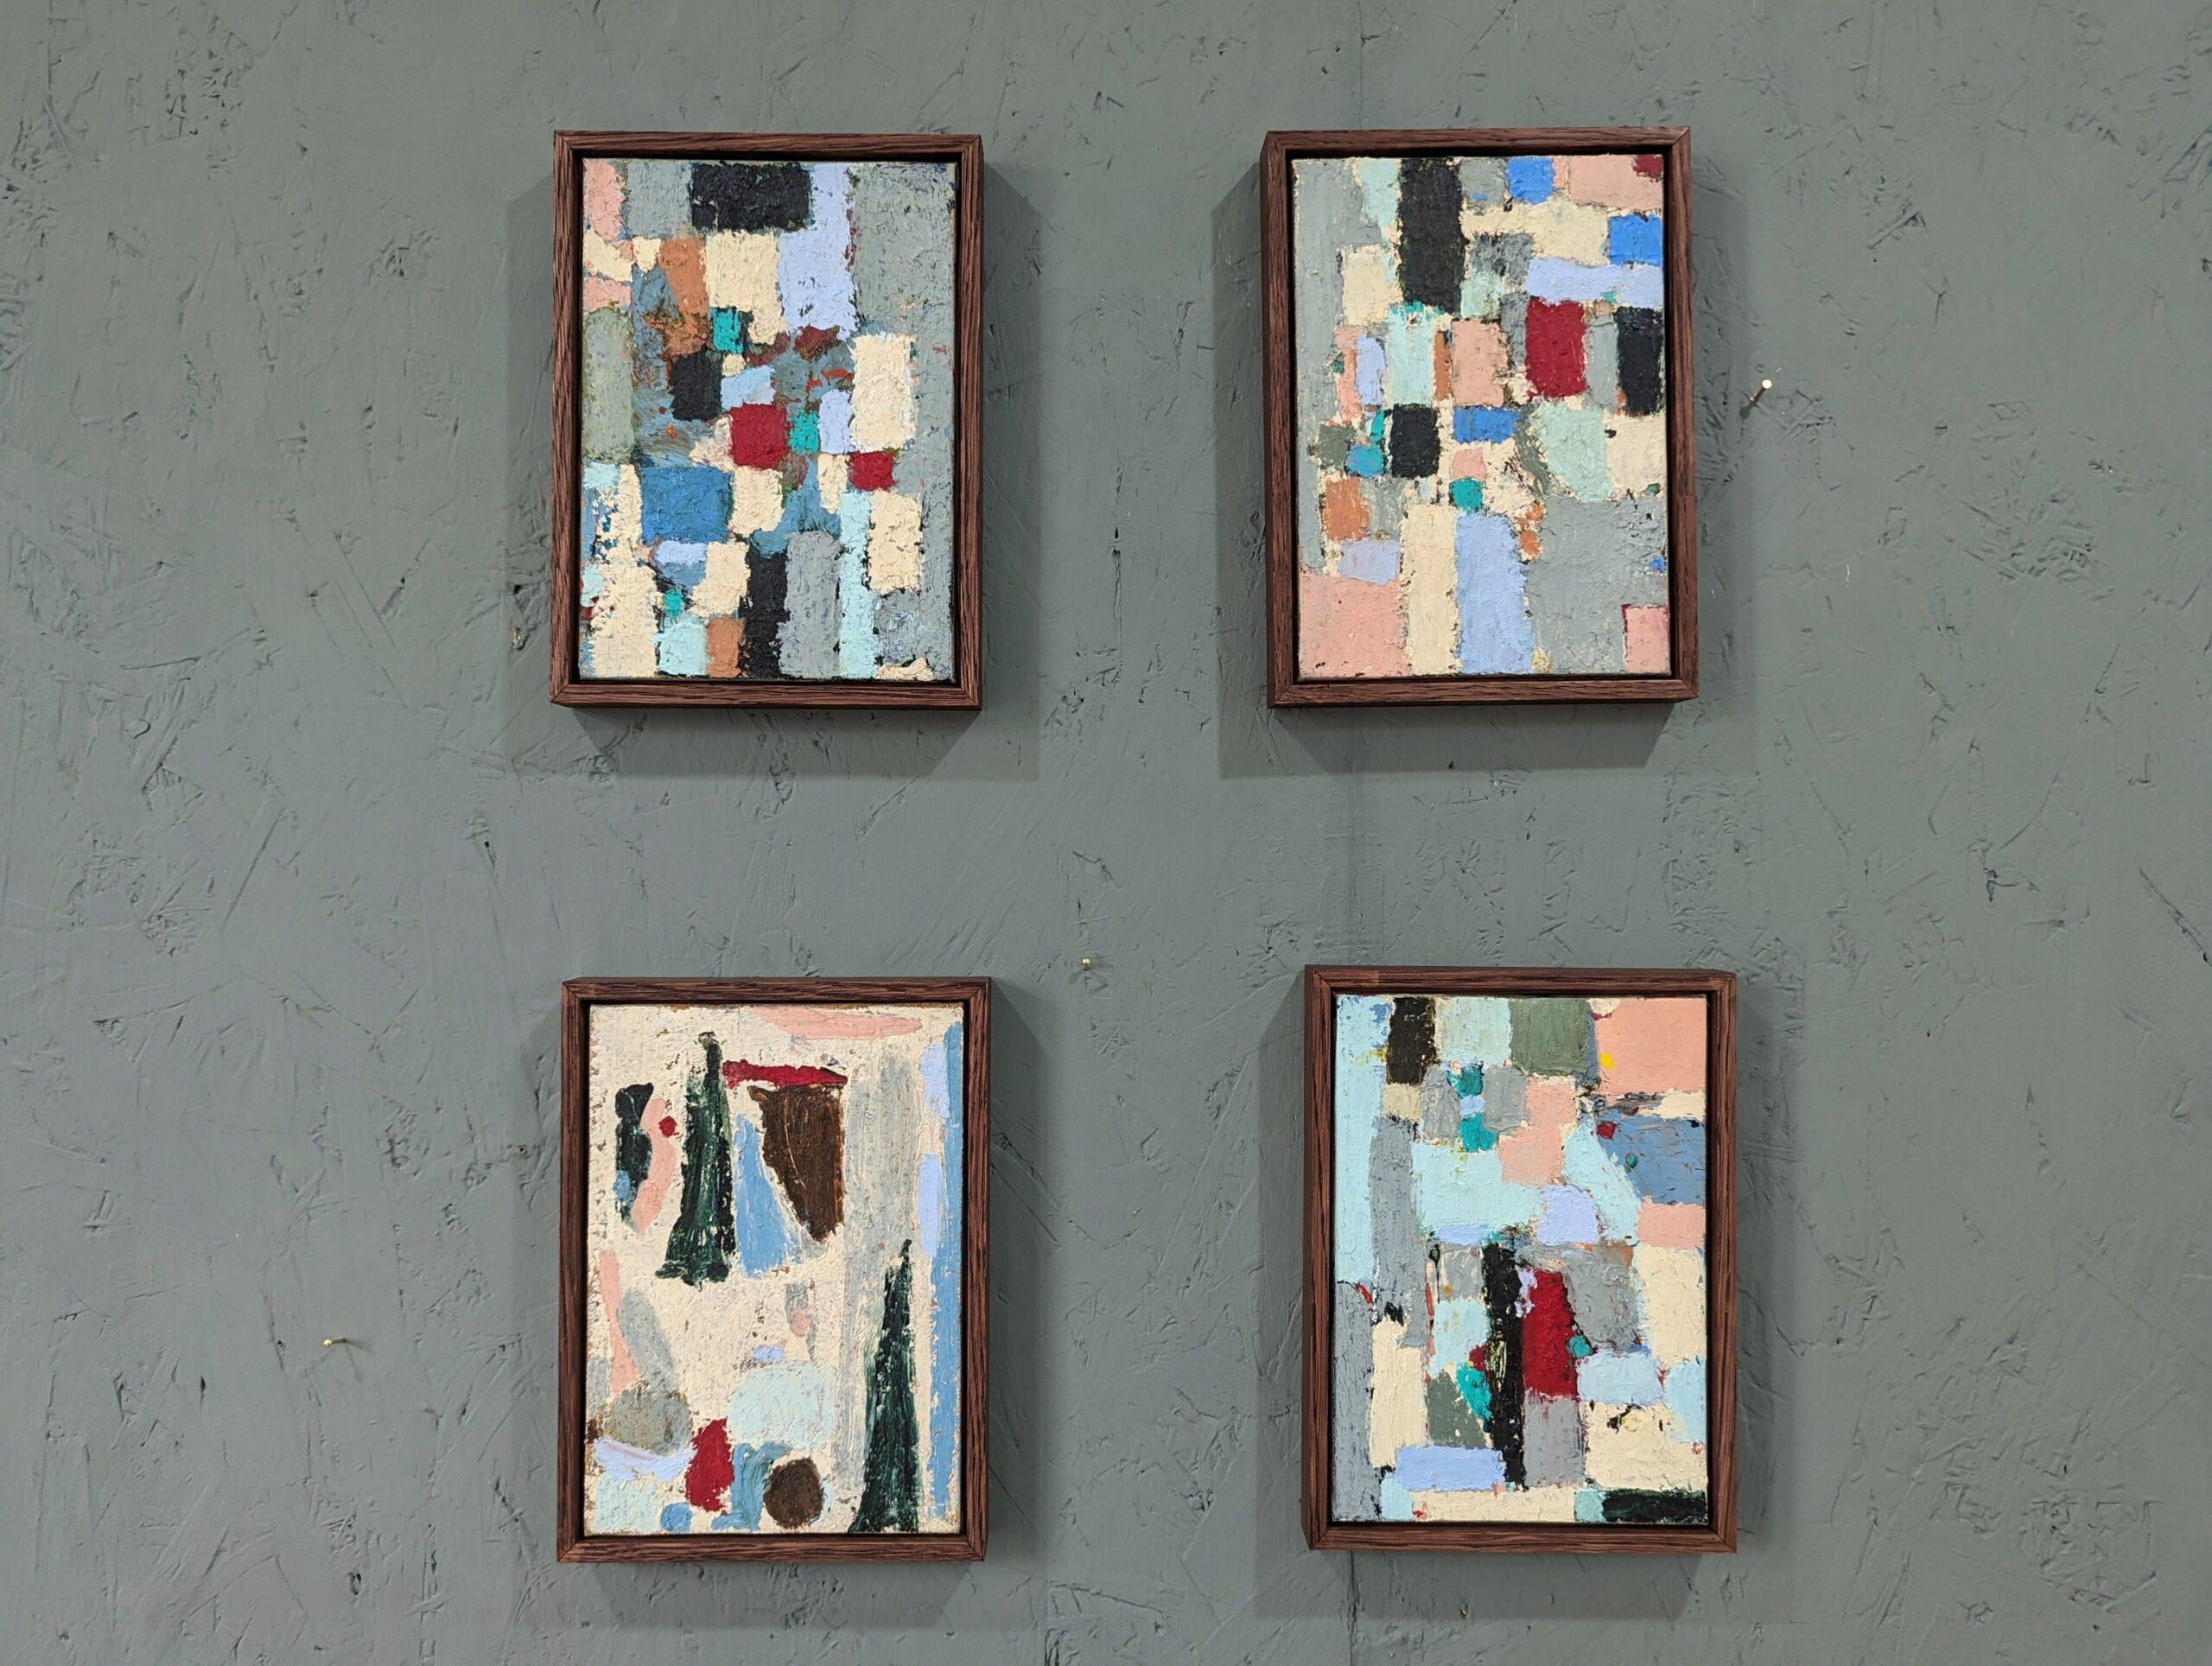 SET OF 4 MINI ABSTRACT OIL PAINTINGS
Size: 20 x 15 cm each (including frame) x4
Oil on linen panel

A small but powerful set of abstract compositions by British artist Lloyd Durling, painted with oil onto linen panel. Each one signed, titled and